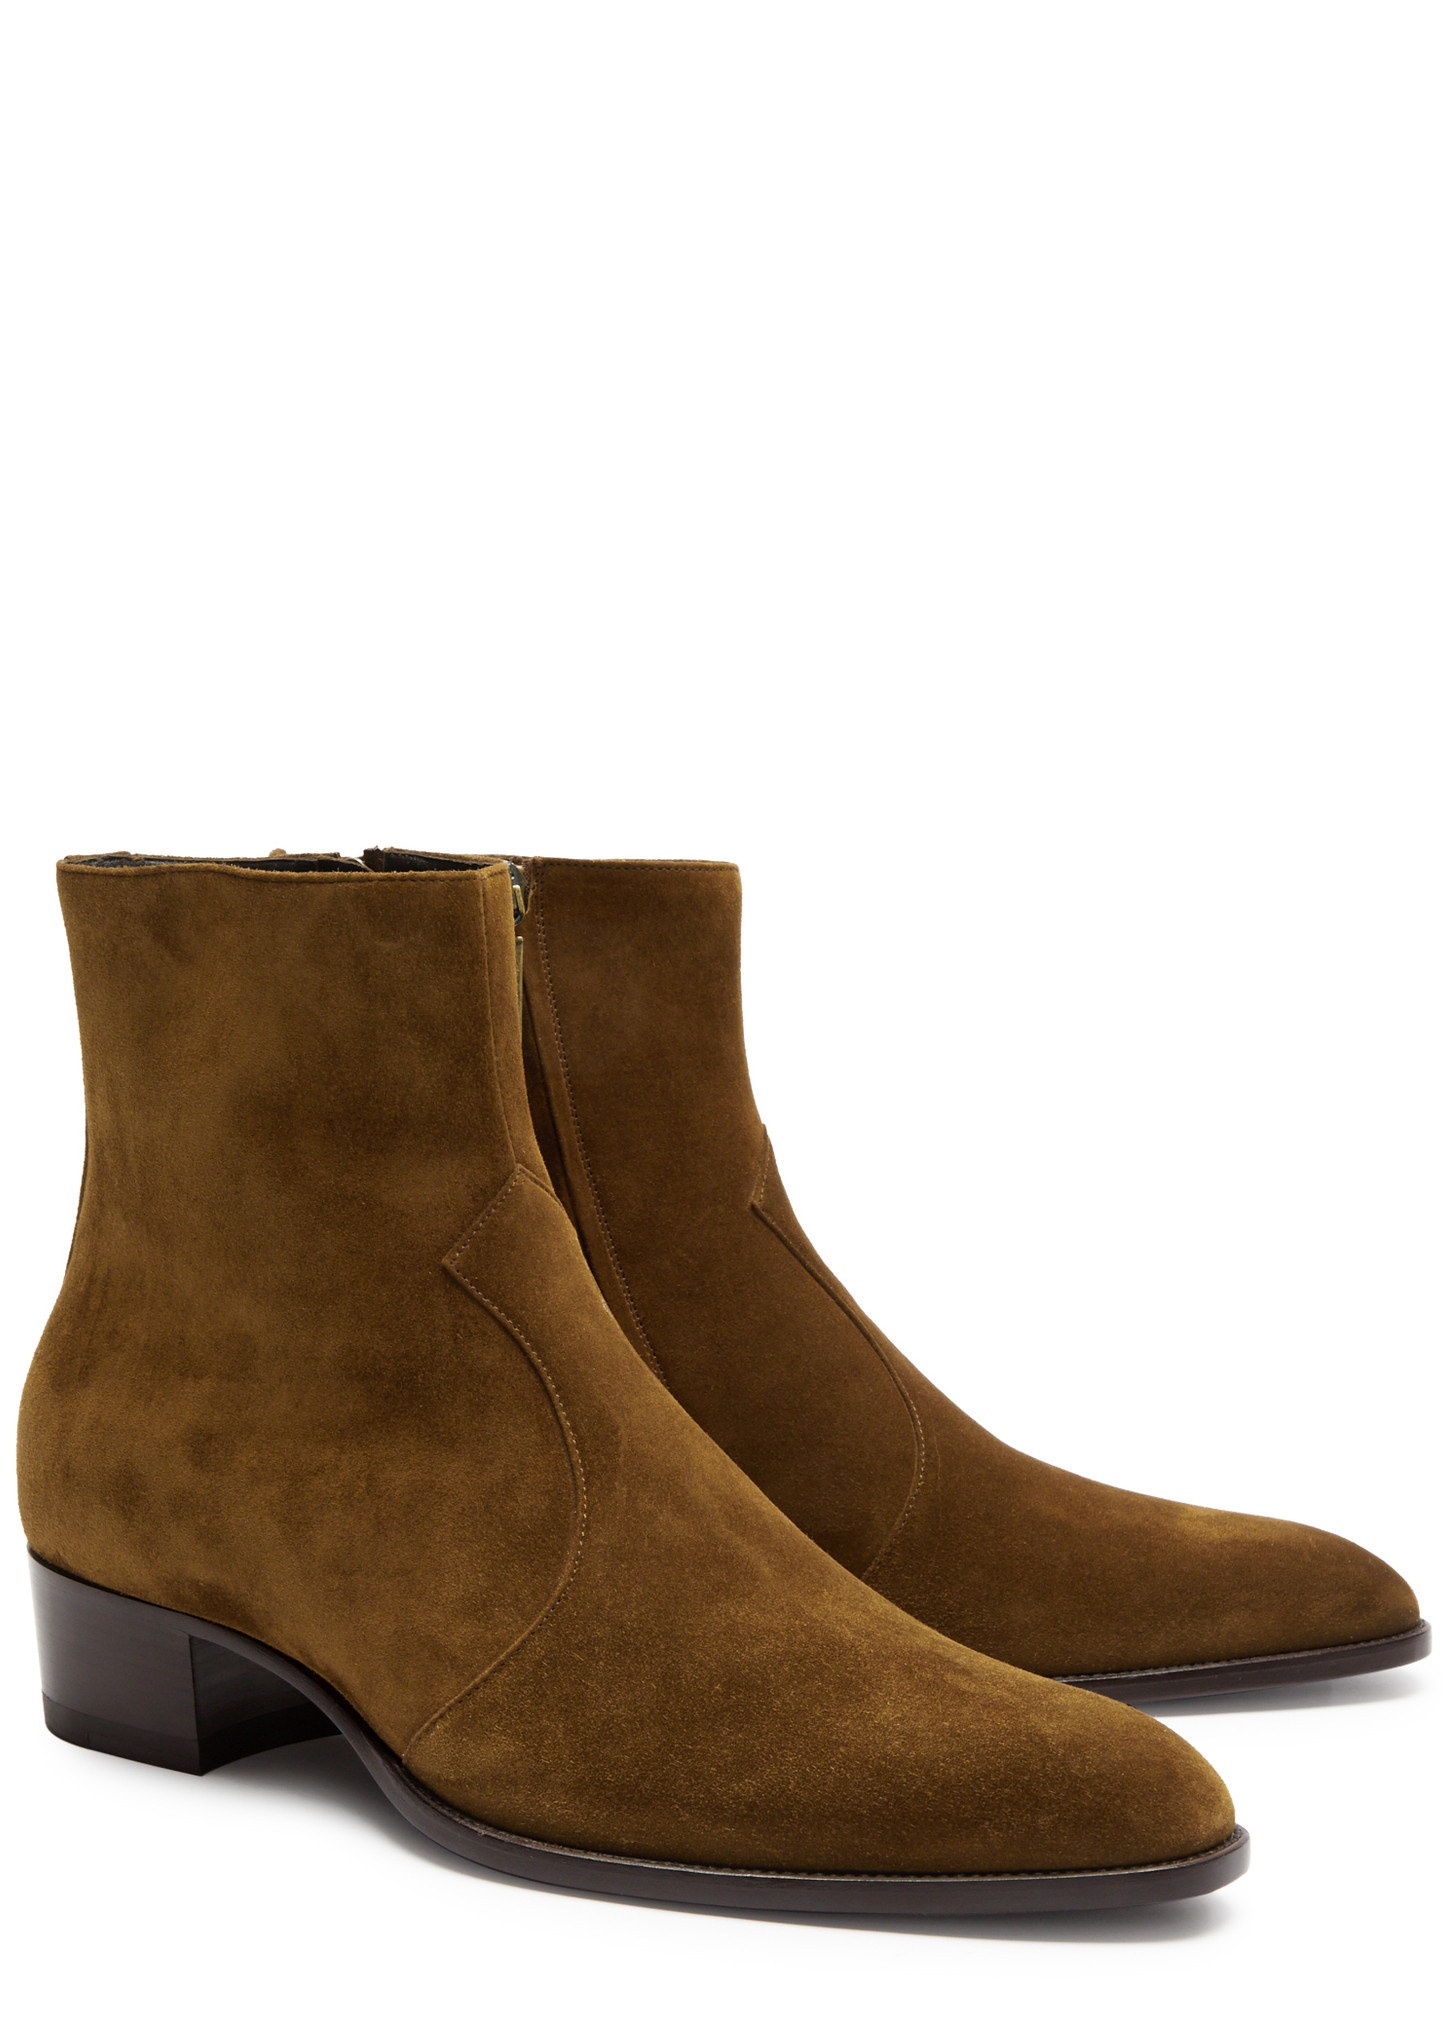 Wyatt 40 suede ankle boots - 2